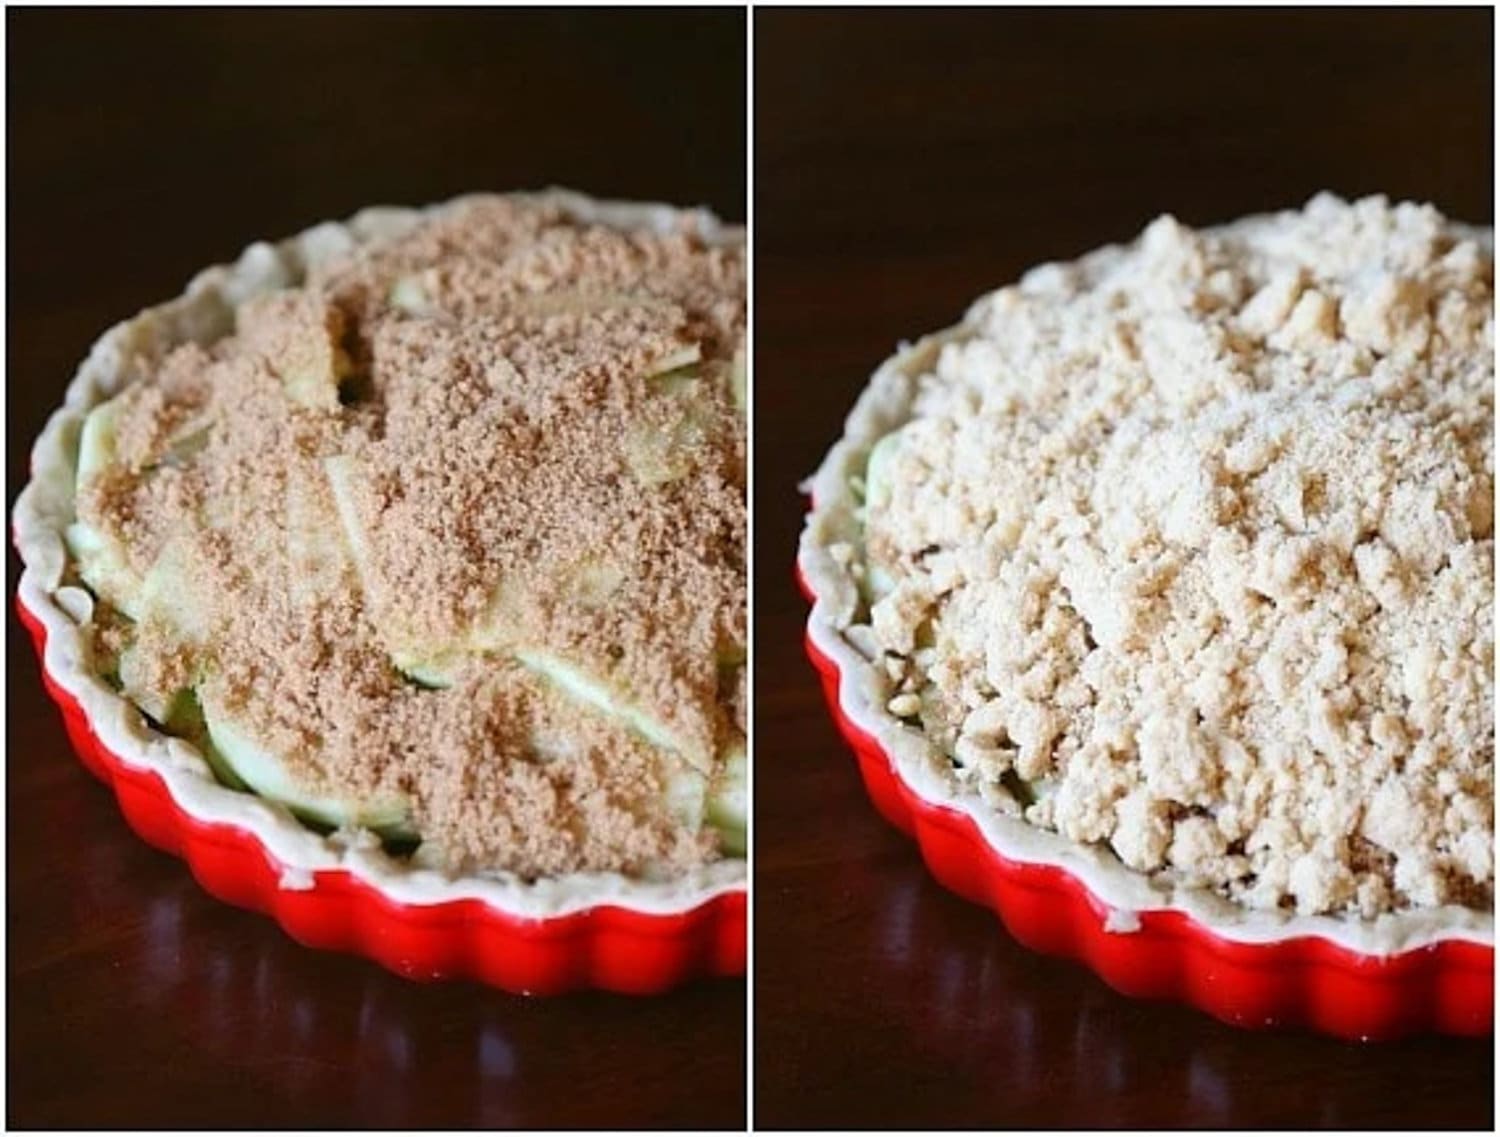 Apple tart topped with a crumb topping